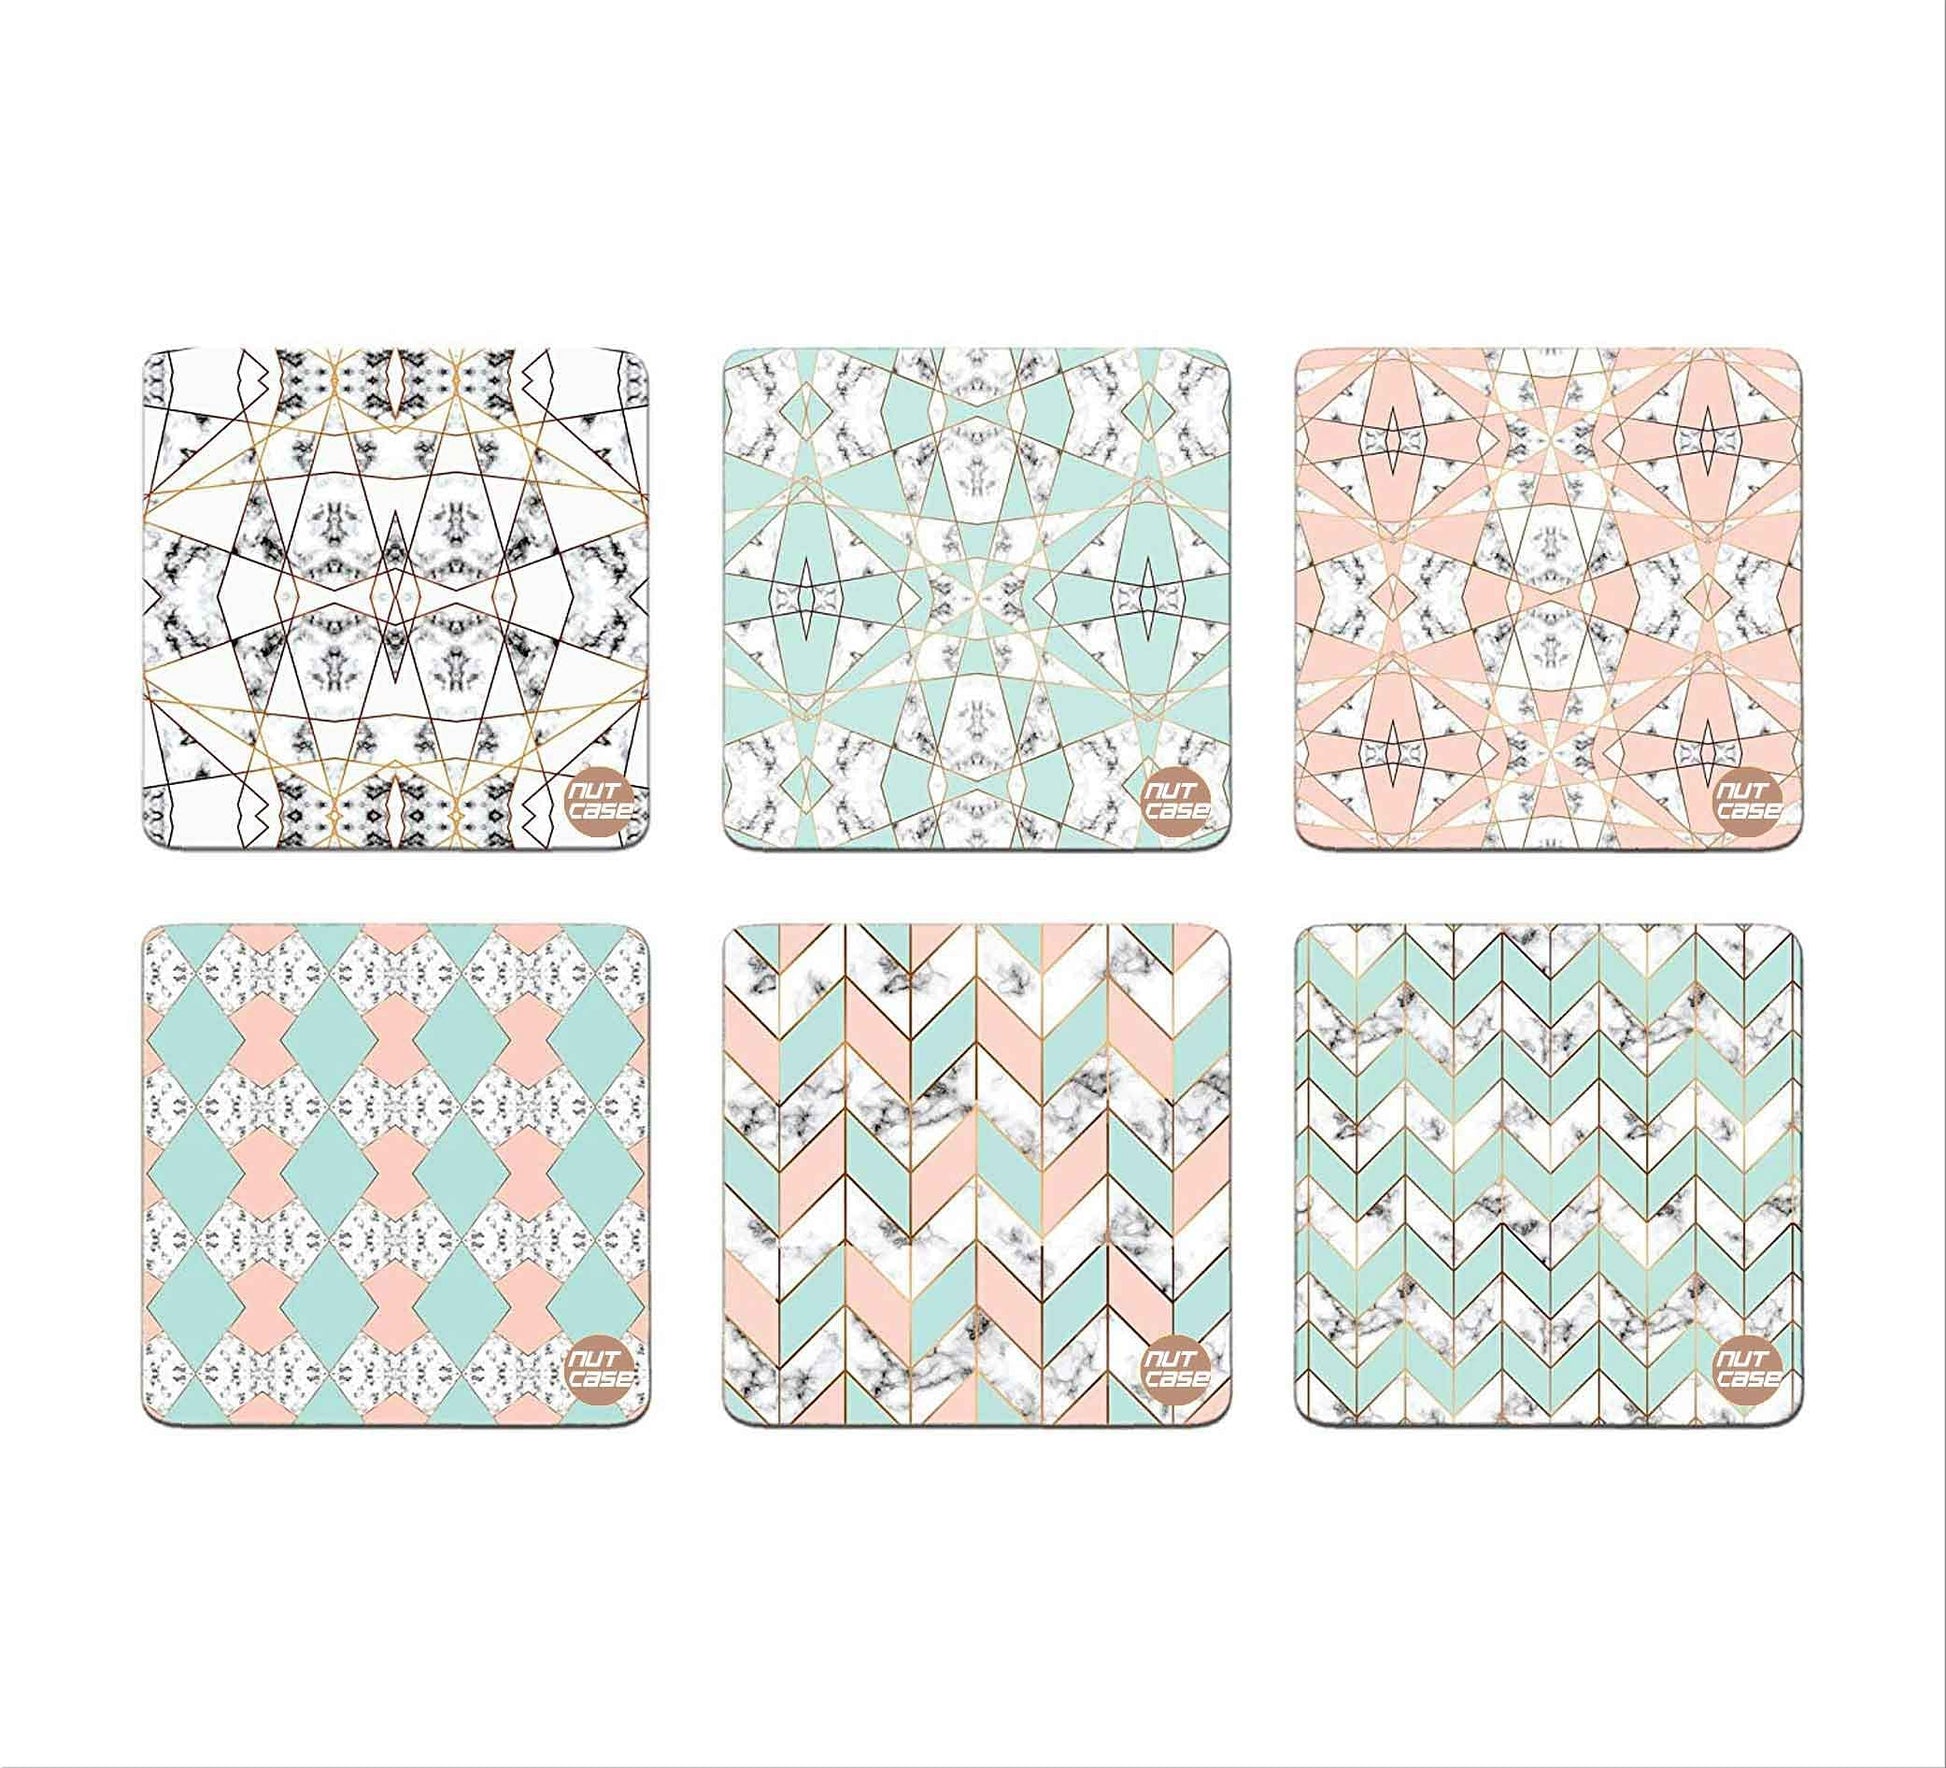 Square Design Coaster Set of 6 for Coffee Mugs & Water Glasses - Marble Pastel Nutcase